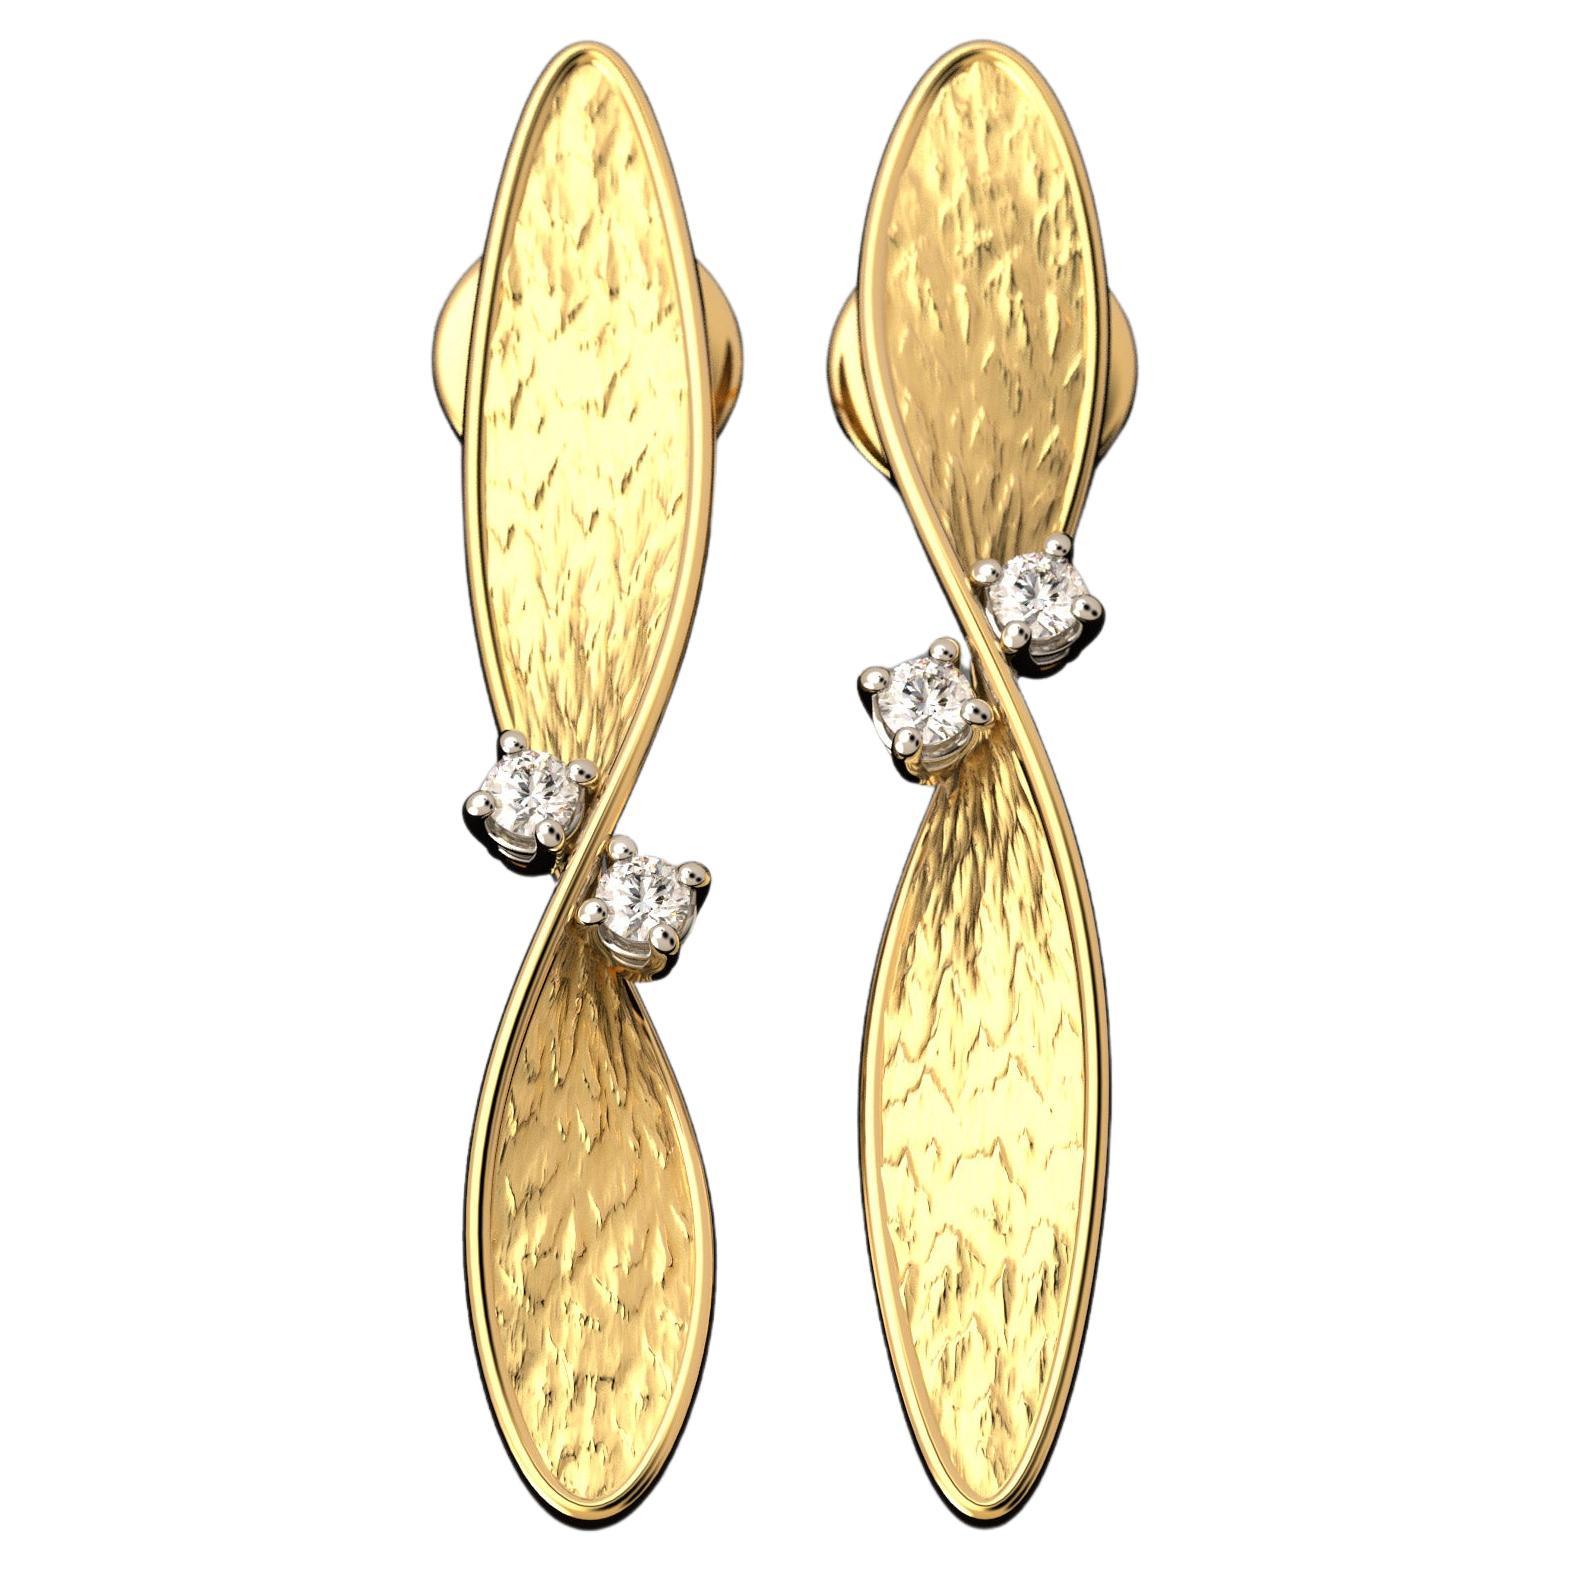 18k Gold Diamond Earrings made in Italy by Oltremare Gioielli, Italian Jewelry. For Sale